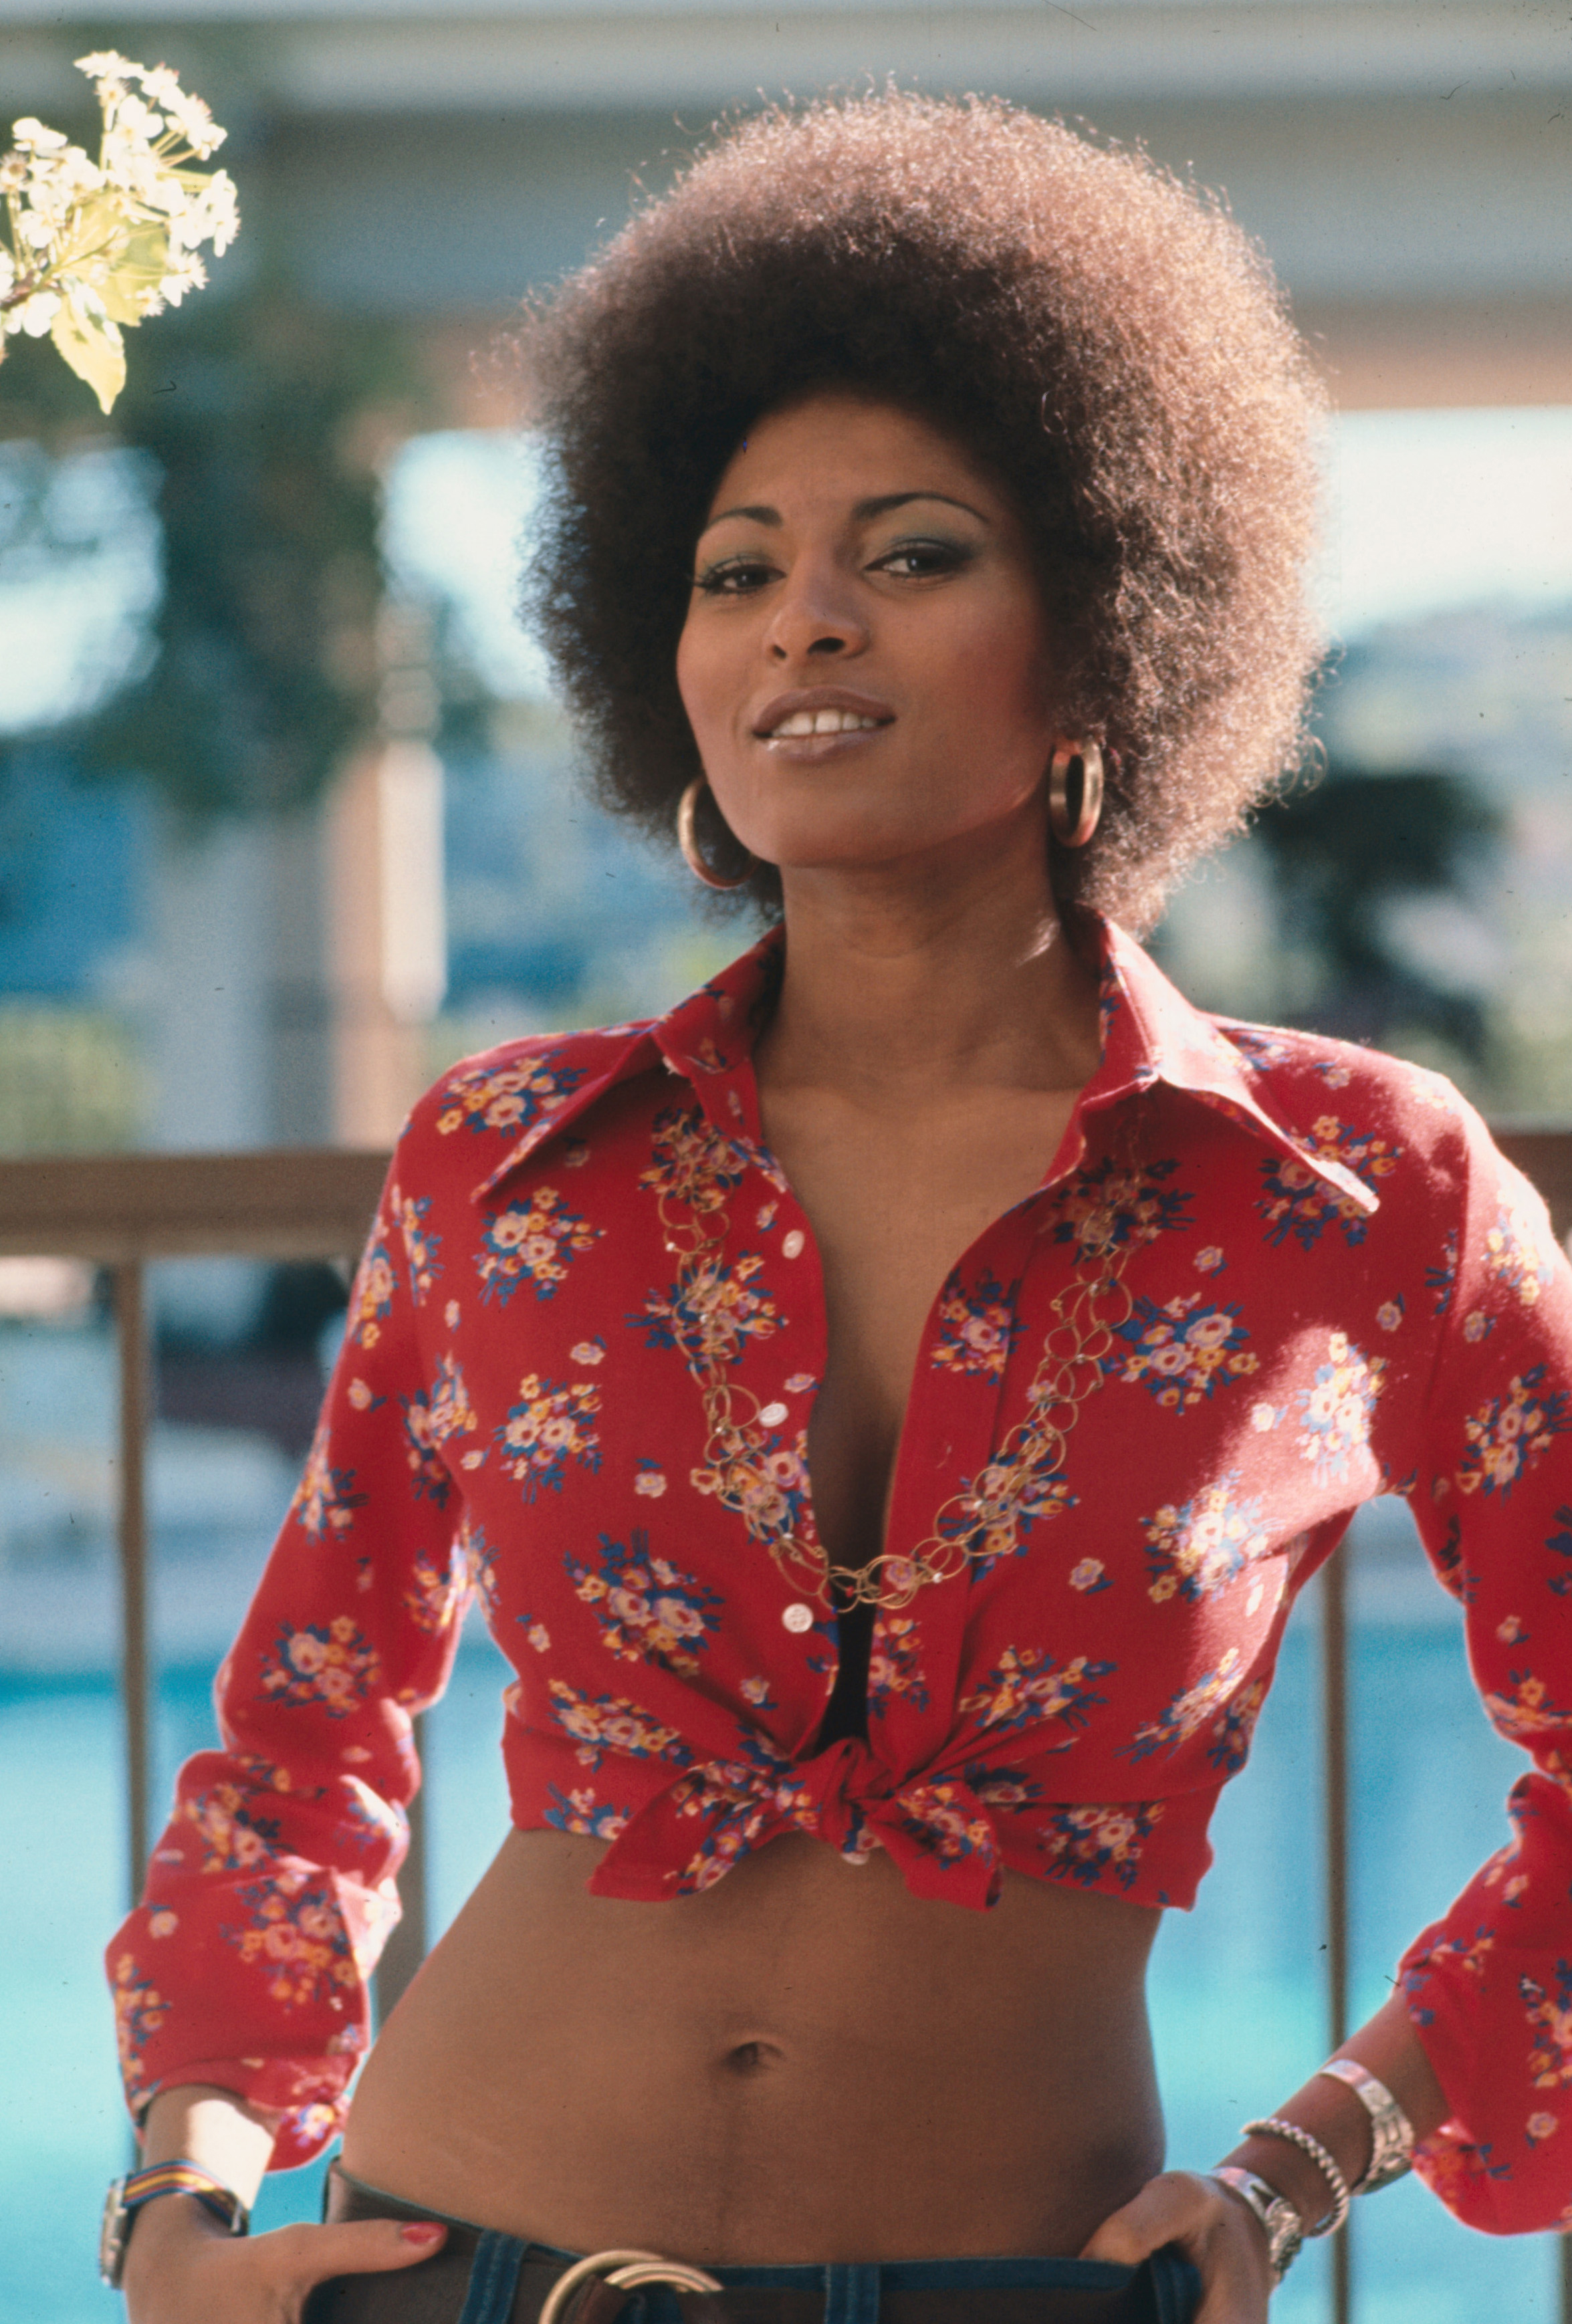 Coffy (1973) Directed by Jack HillShown: Pam Grier